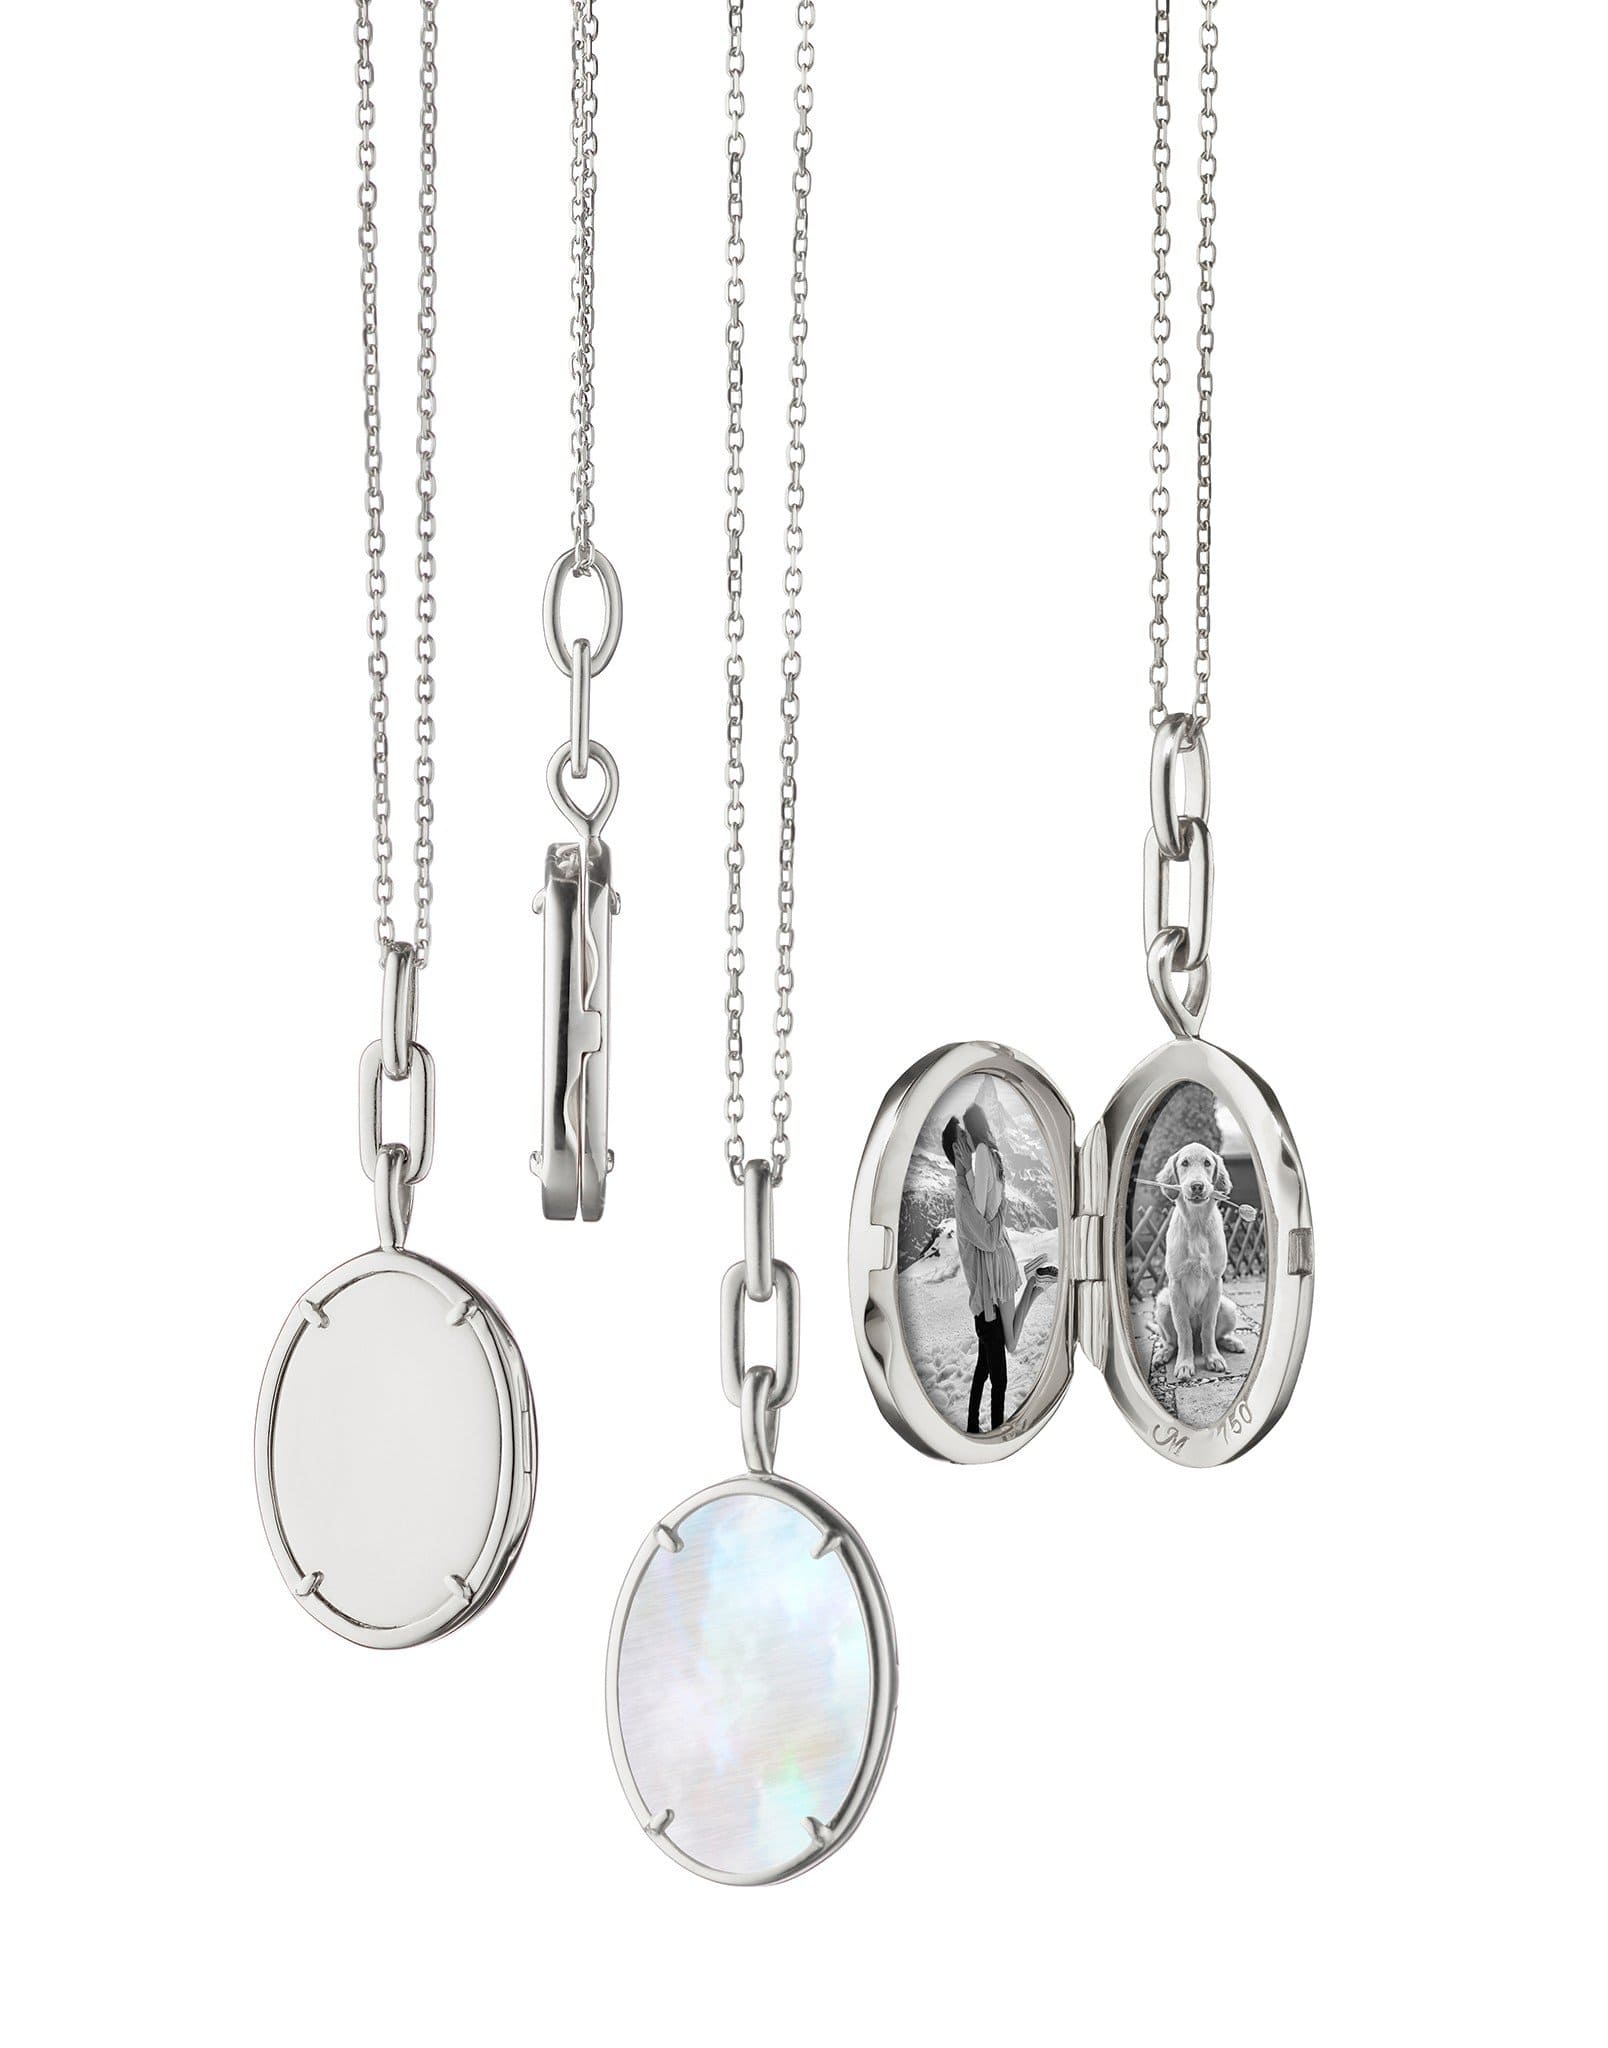 MONICA RICH KOSANN-Oval Mother of Pearl Slice Locket Necklace-WHITE GOLD